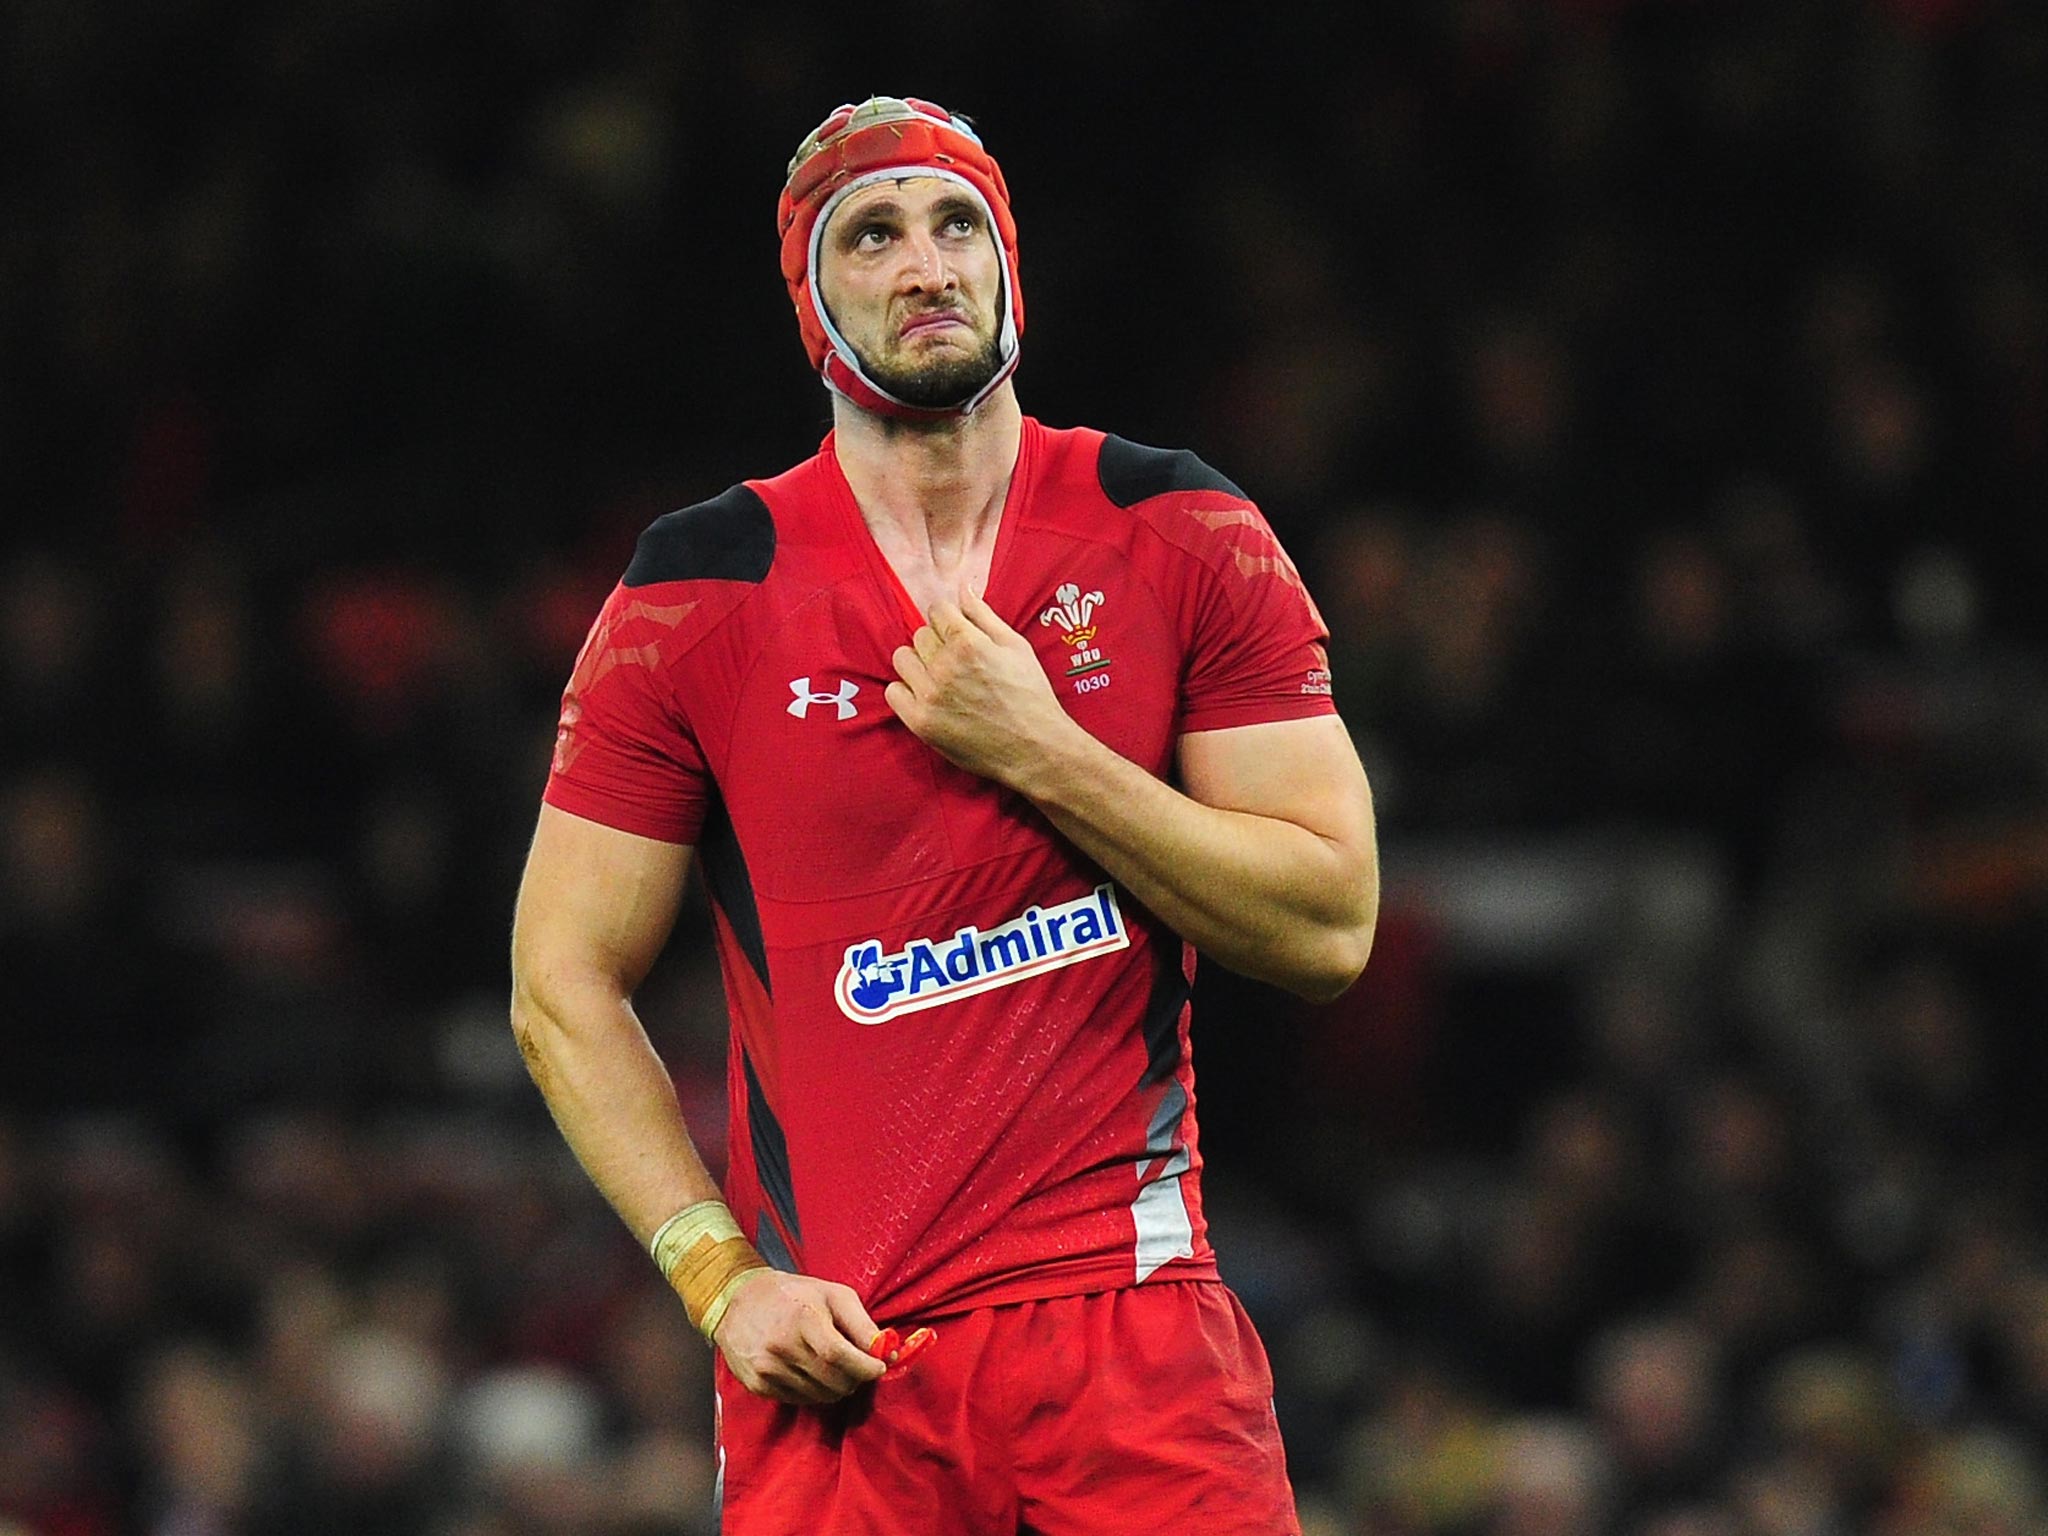 Wales lock Luke Charteris has been ruled out of the Six Nations match against England due to a neck injury